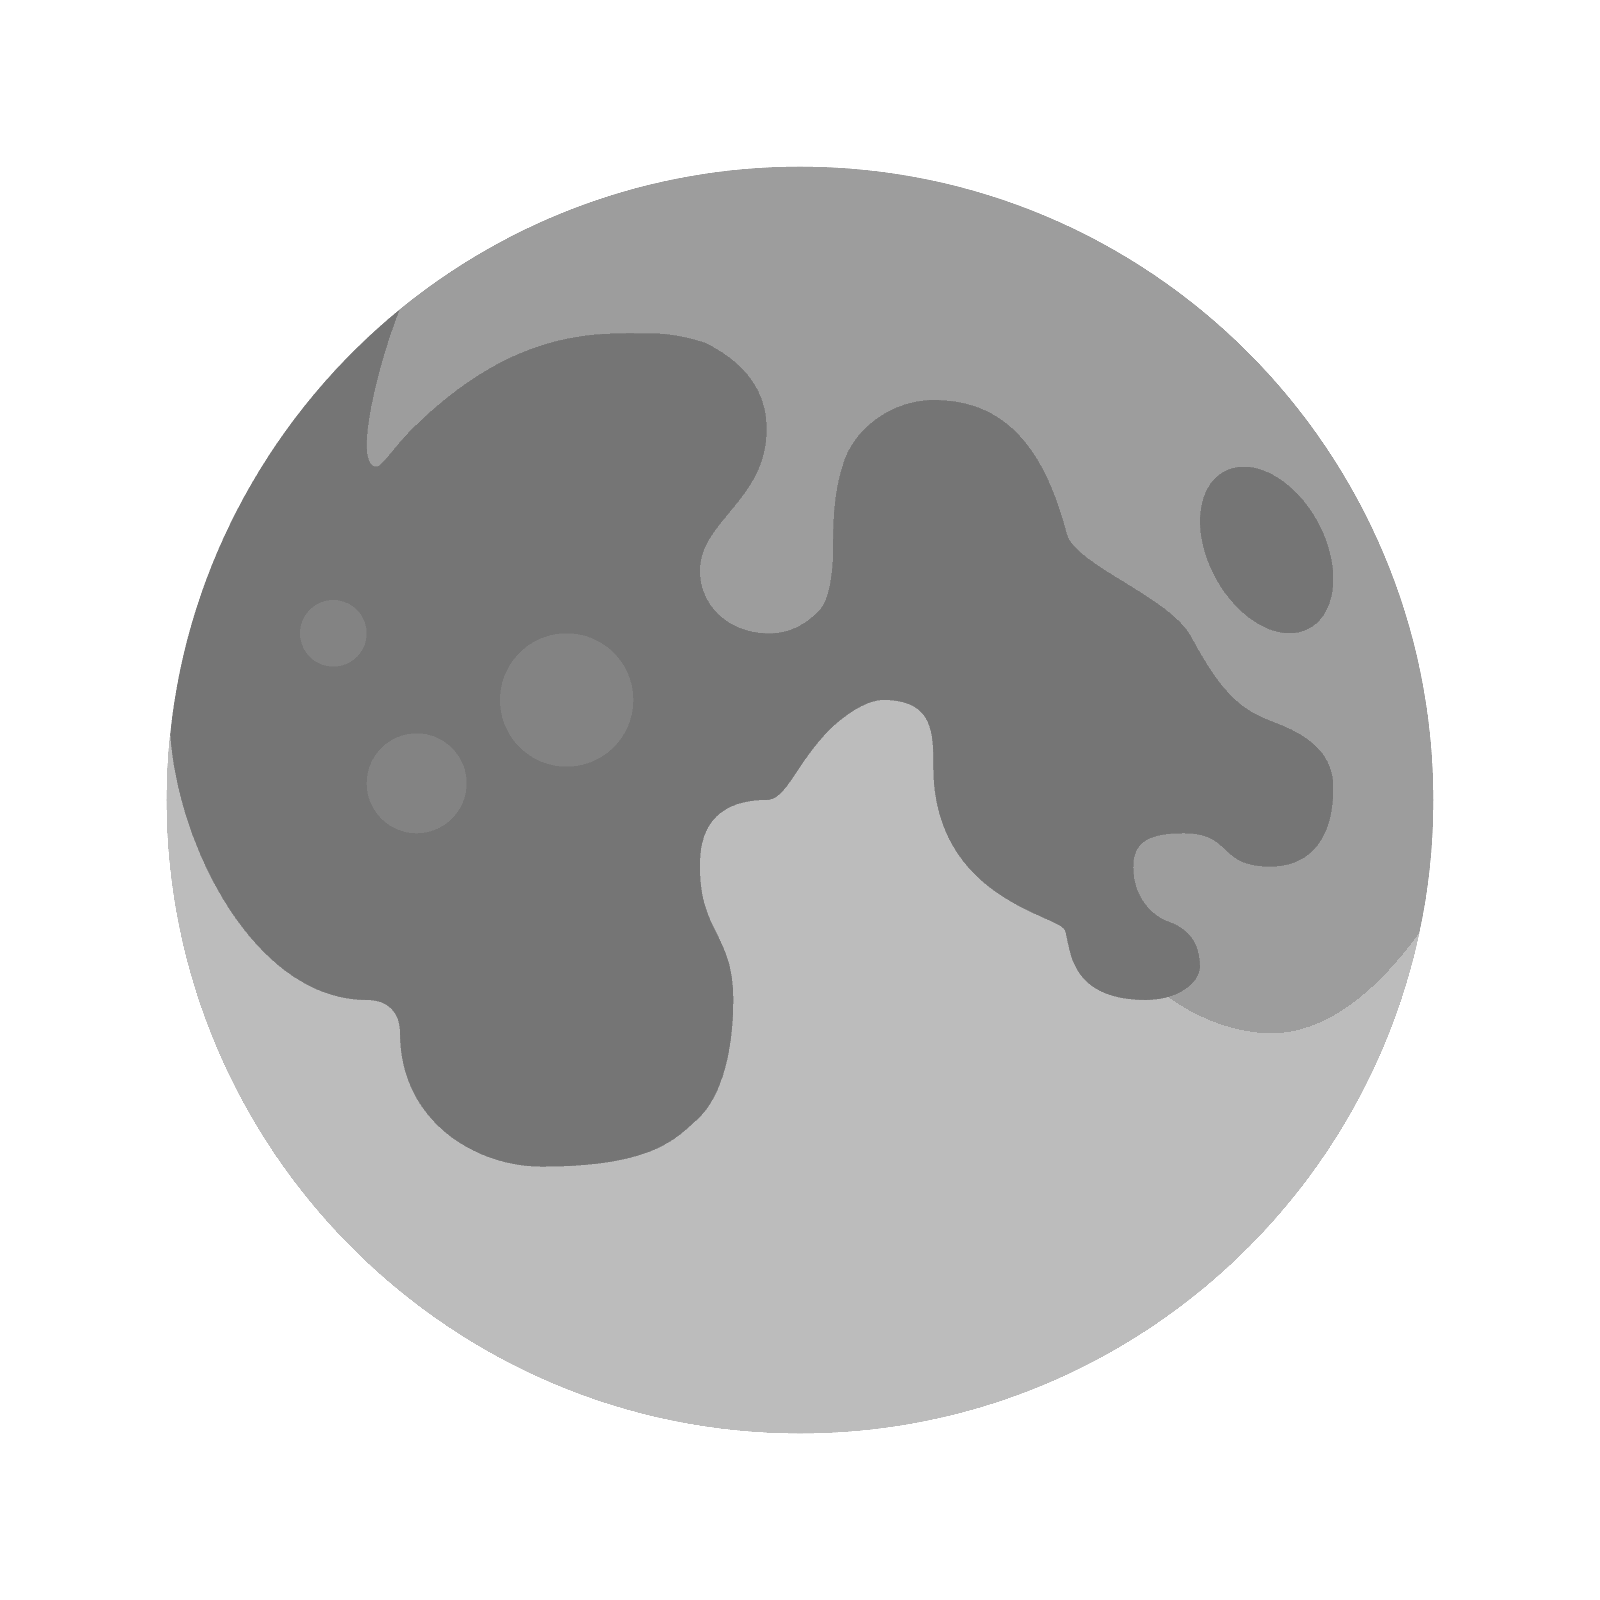 Moon Icon - Ecology, Environment  Nature Icons in SVG and PNG 